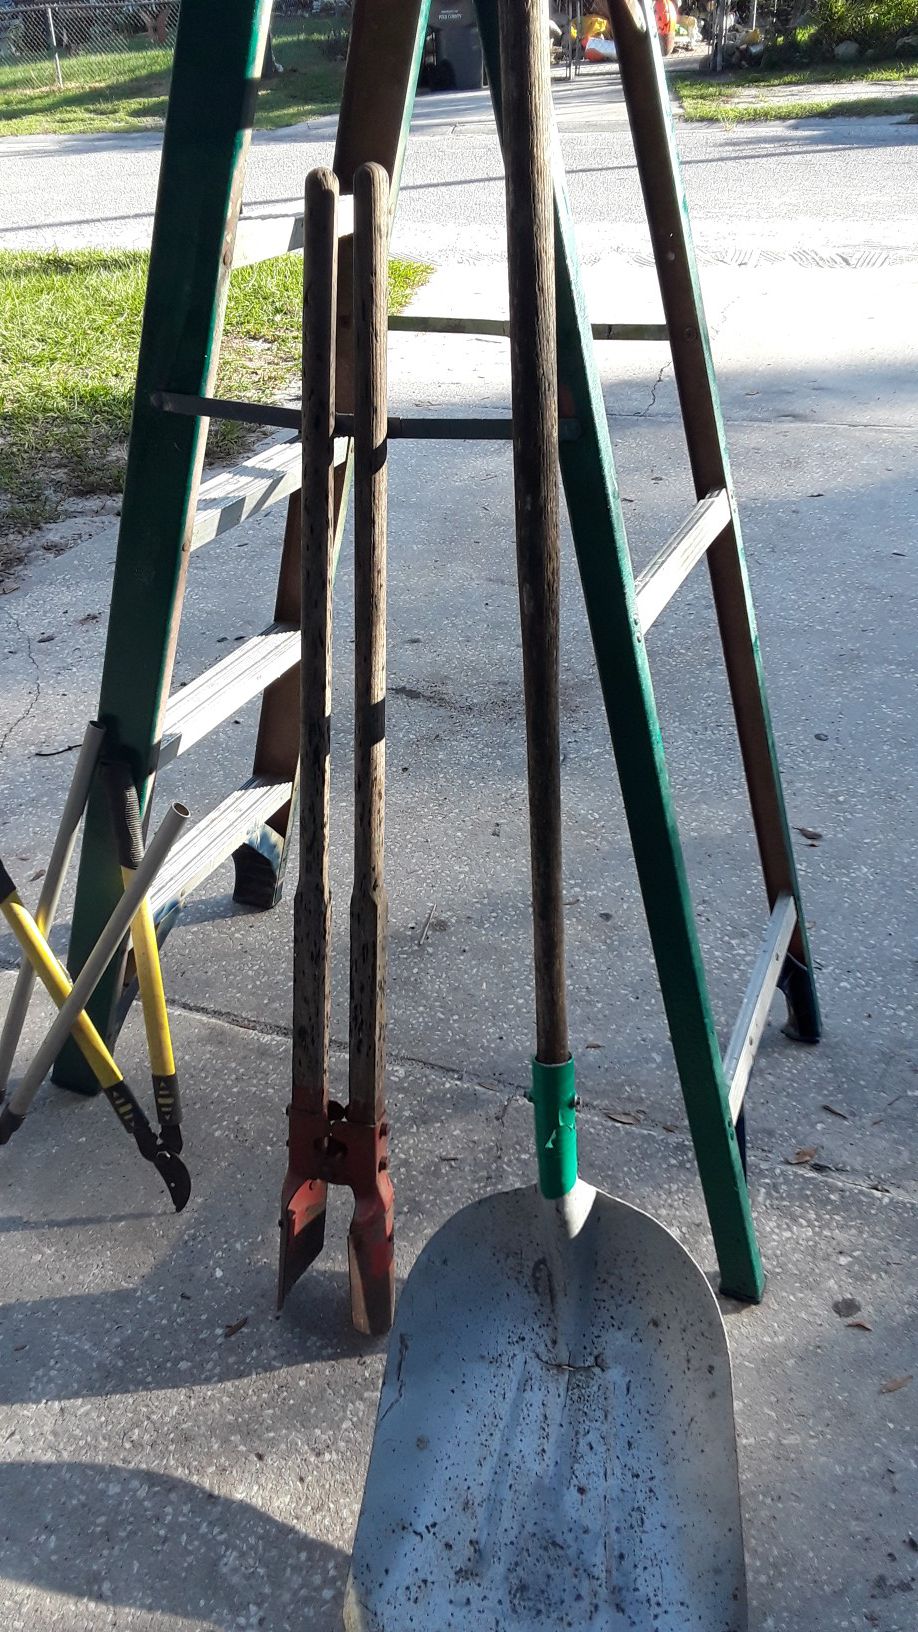 Lawn Equipment. All for 40$